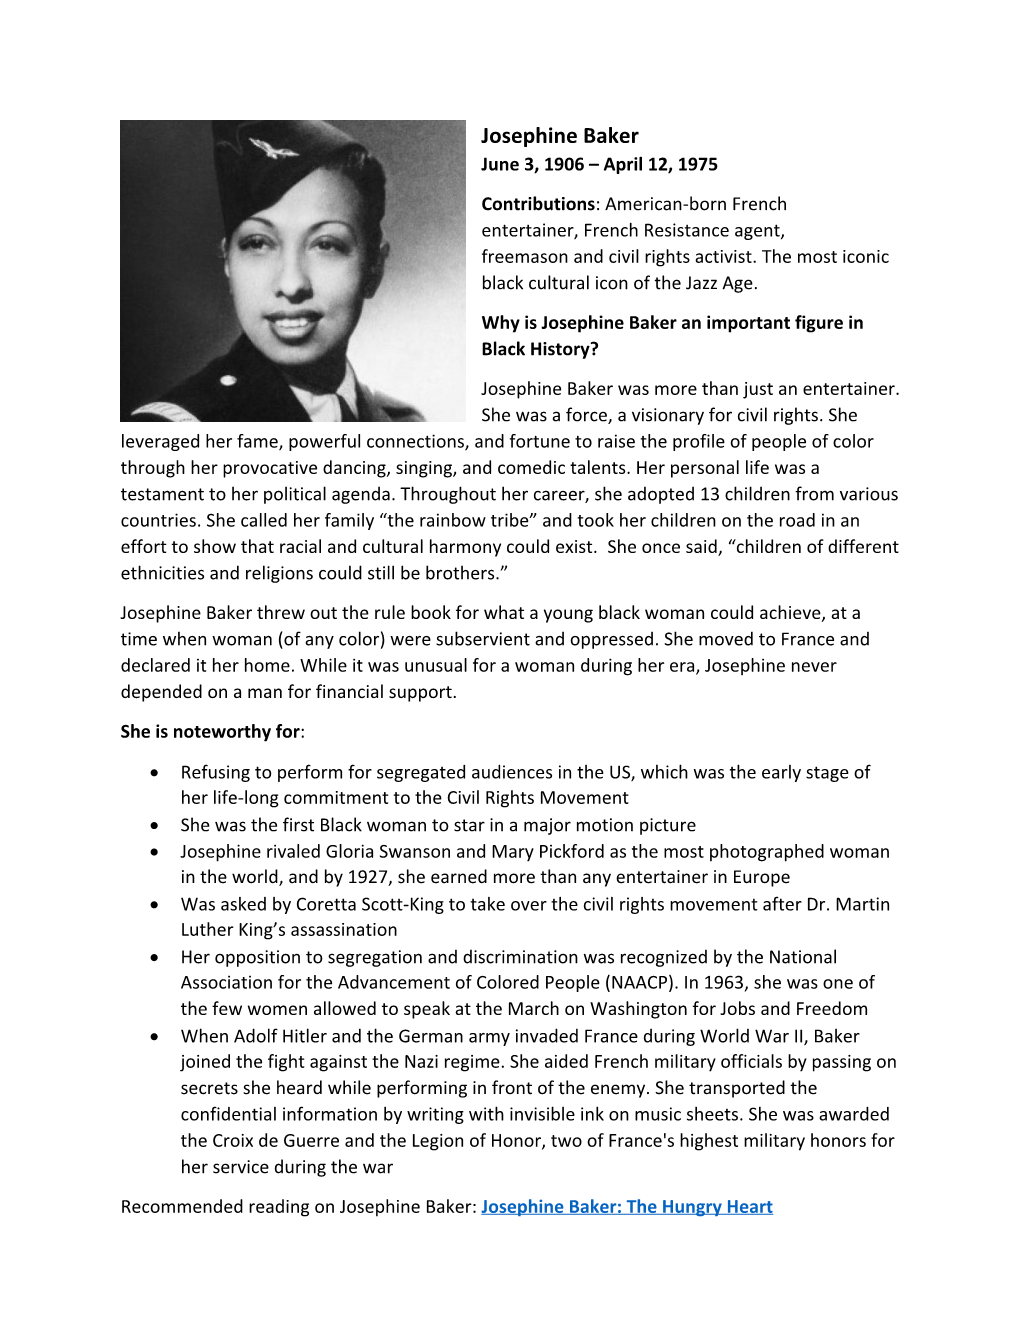 Josephine Baker June 3, 1906 – April 12, 1975 Contributions: American-Born French Entertainer, French Resistance Agent, Freemason and Civil Rights Activist